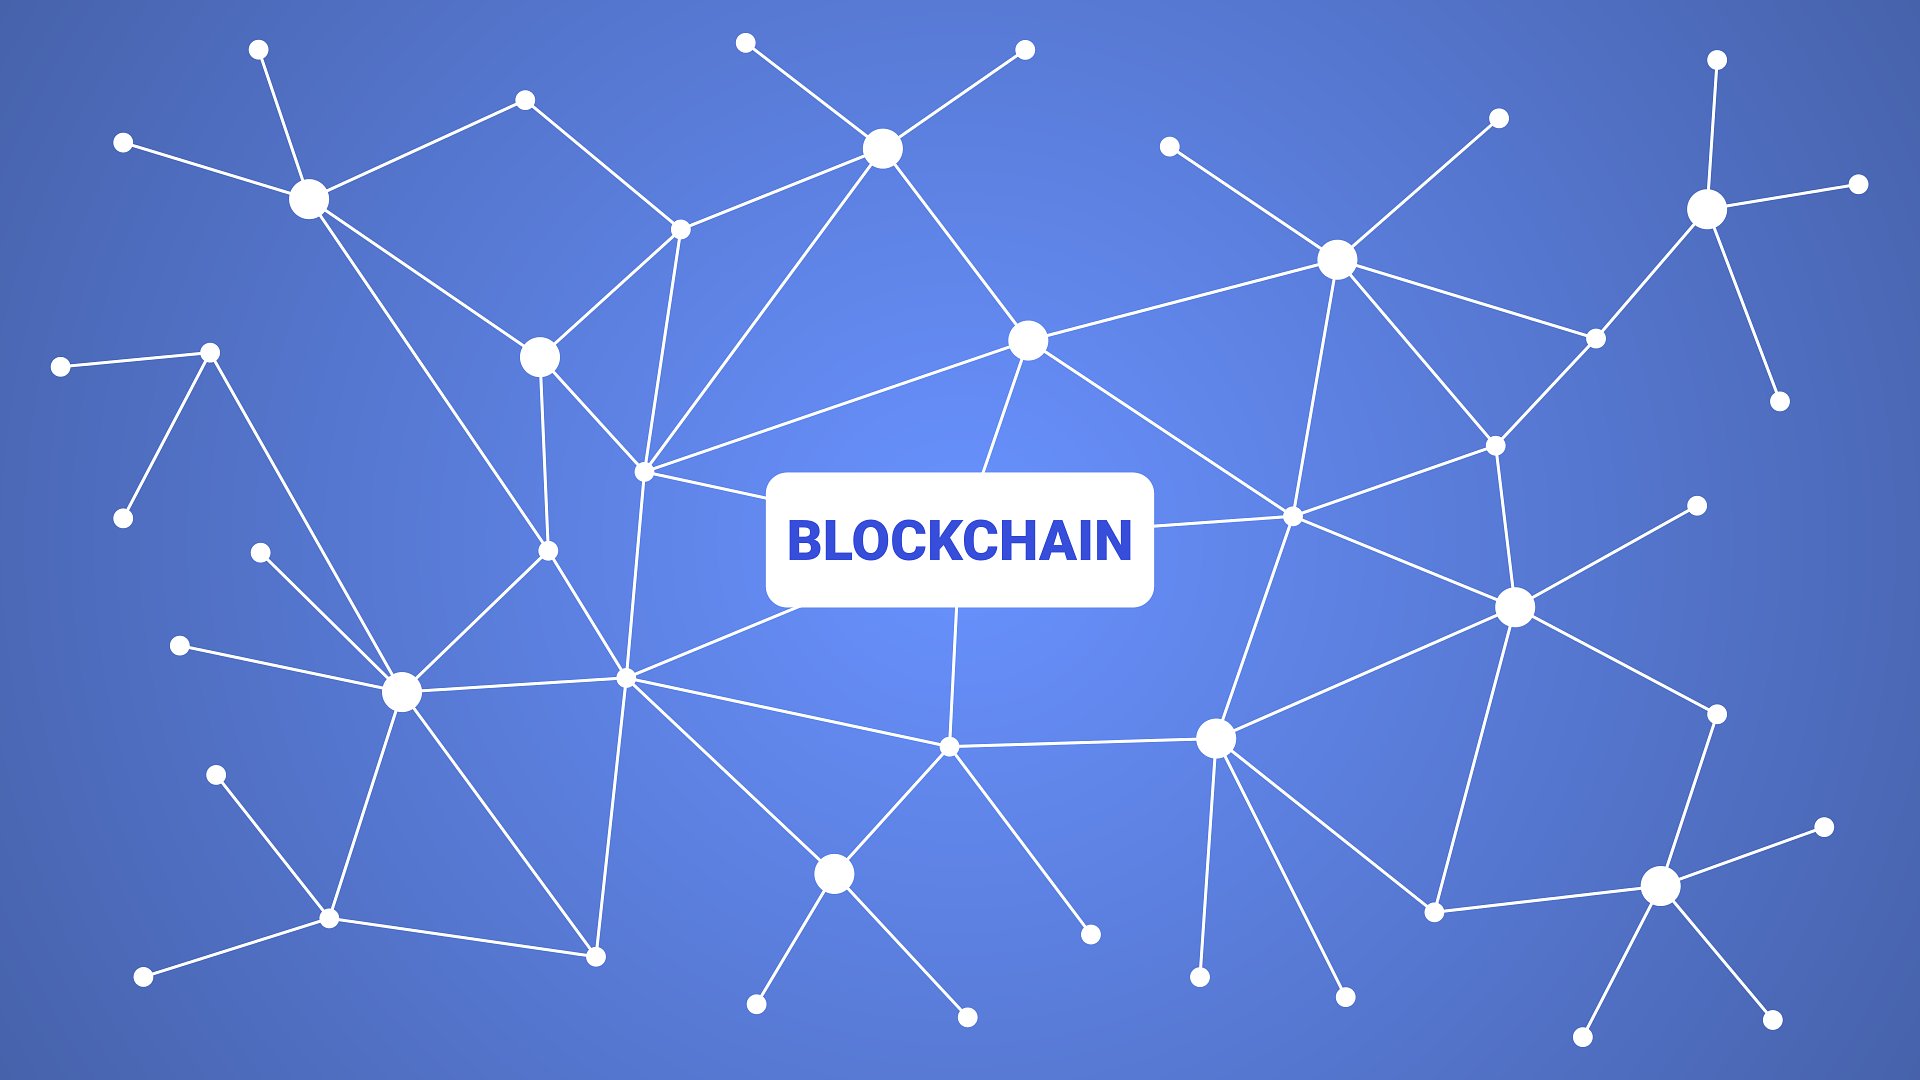 Blockchain: sharing data and breaking with traditional networks